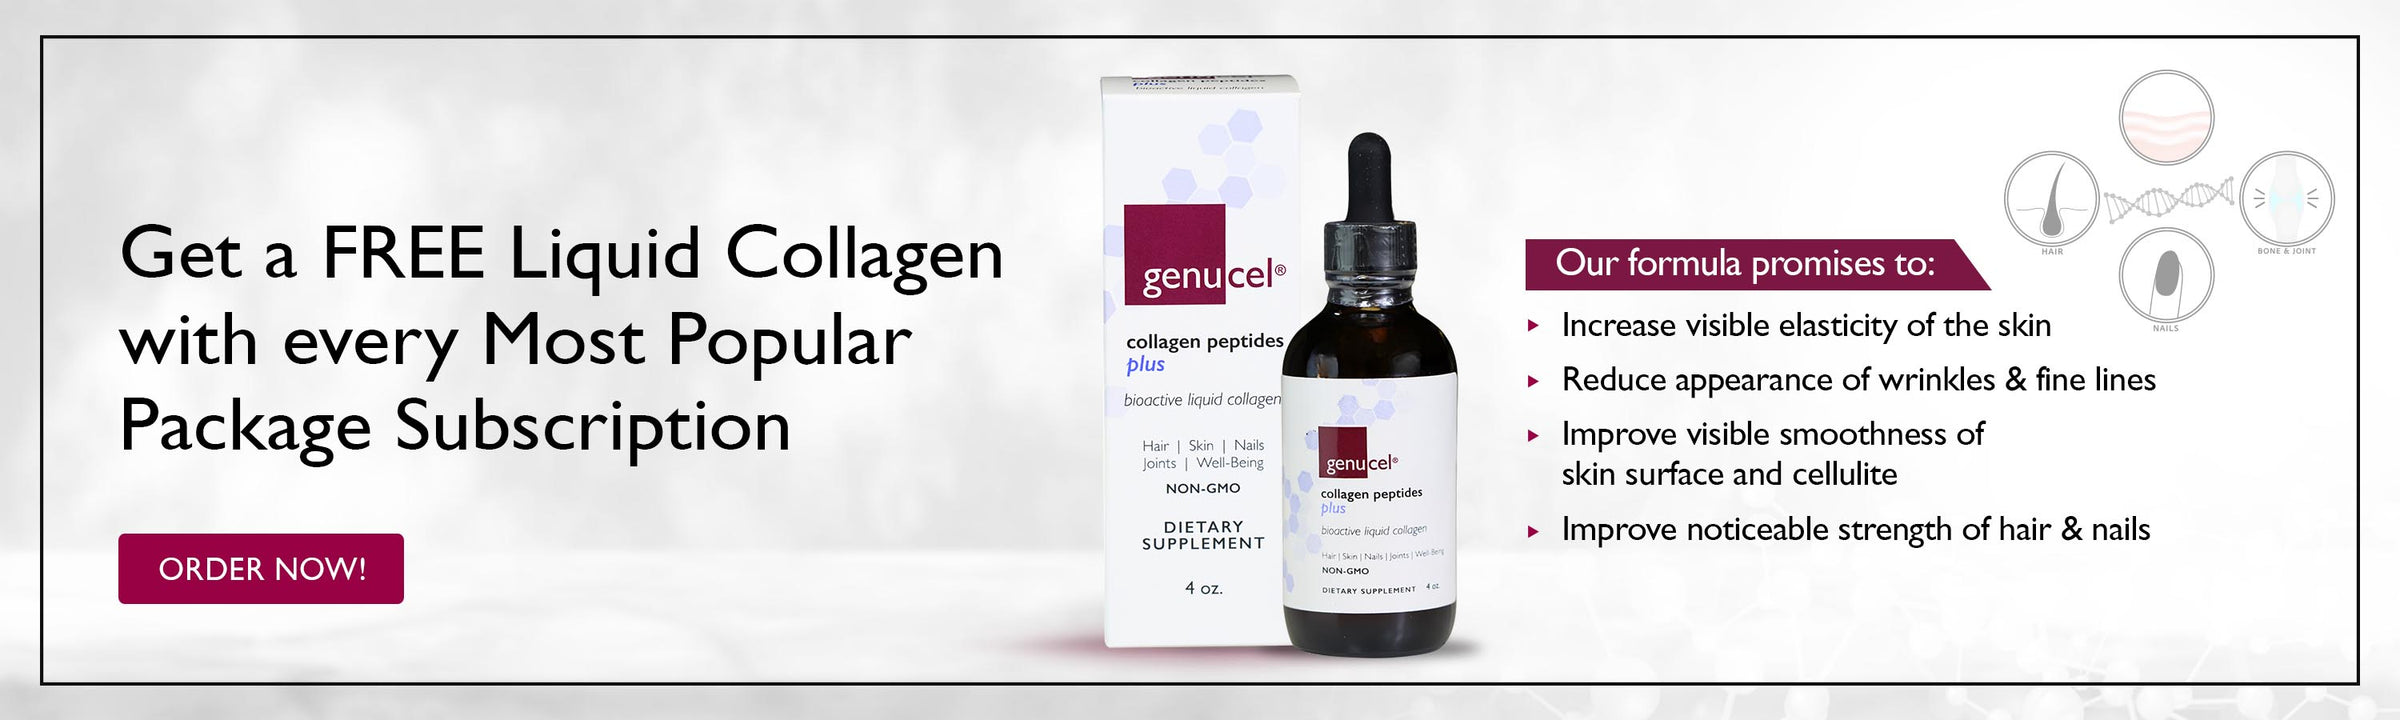 Get a FREE Liquid Collagen with every Most Popular Package Subscription